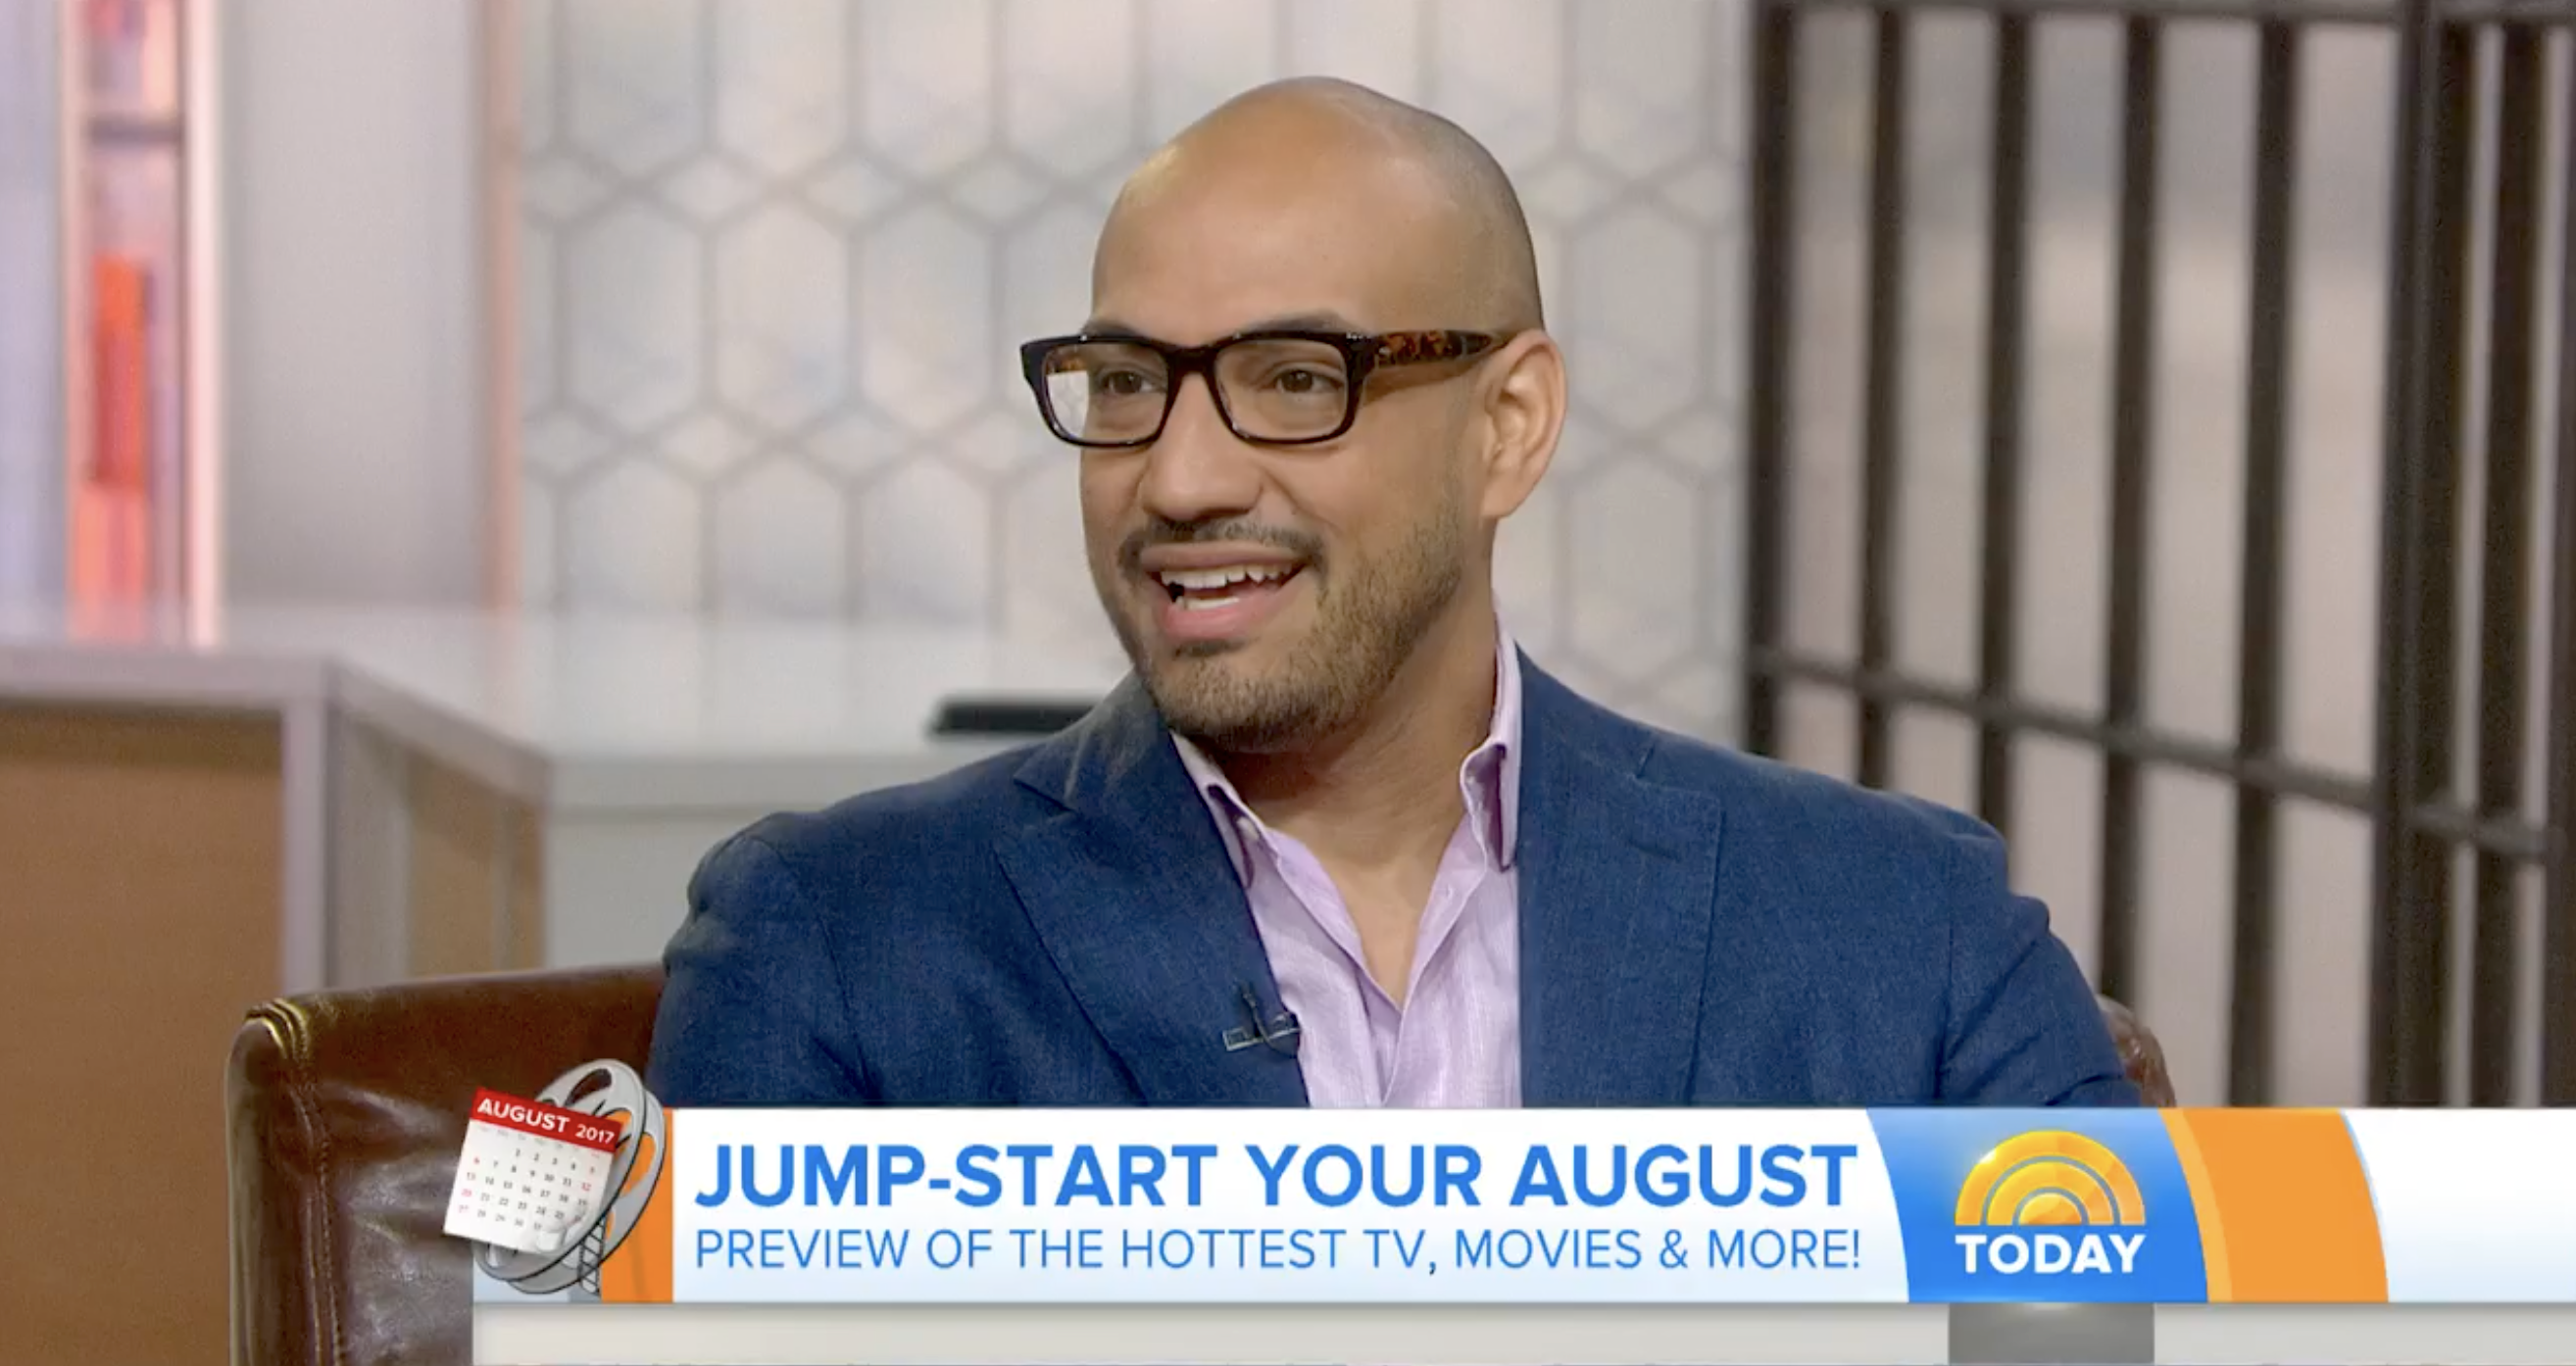 TODAY Show: My August Movie and TV Preview